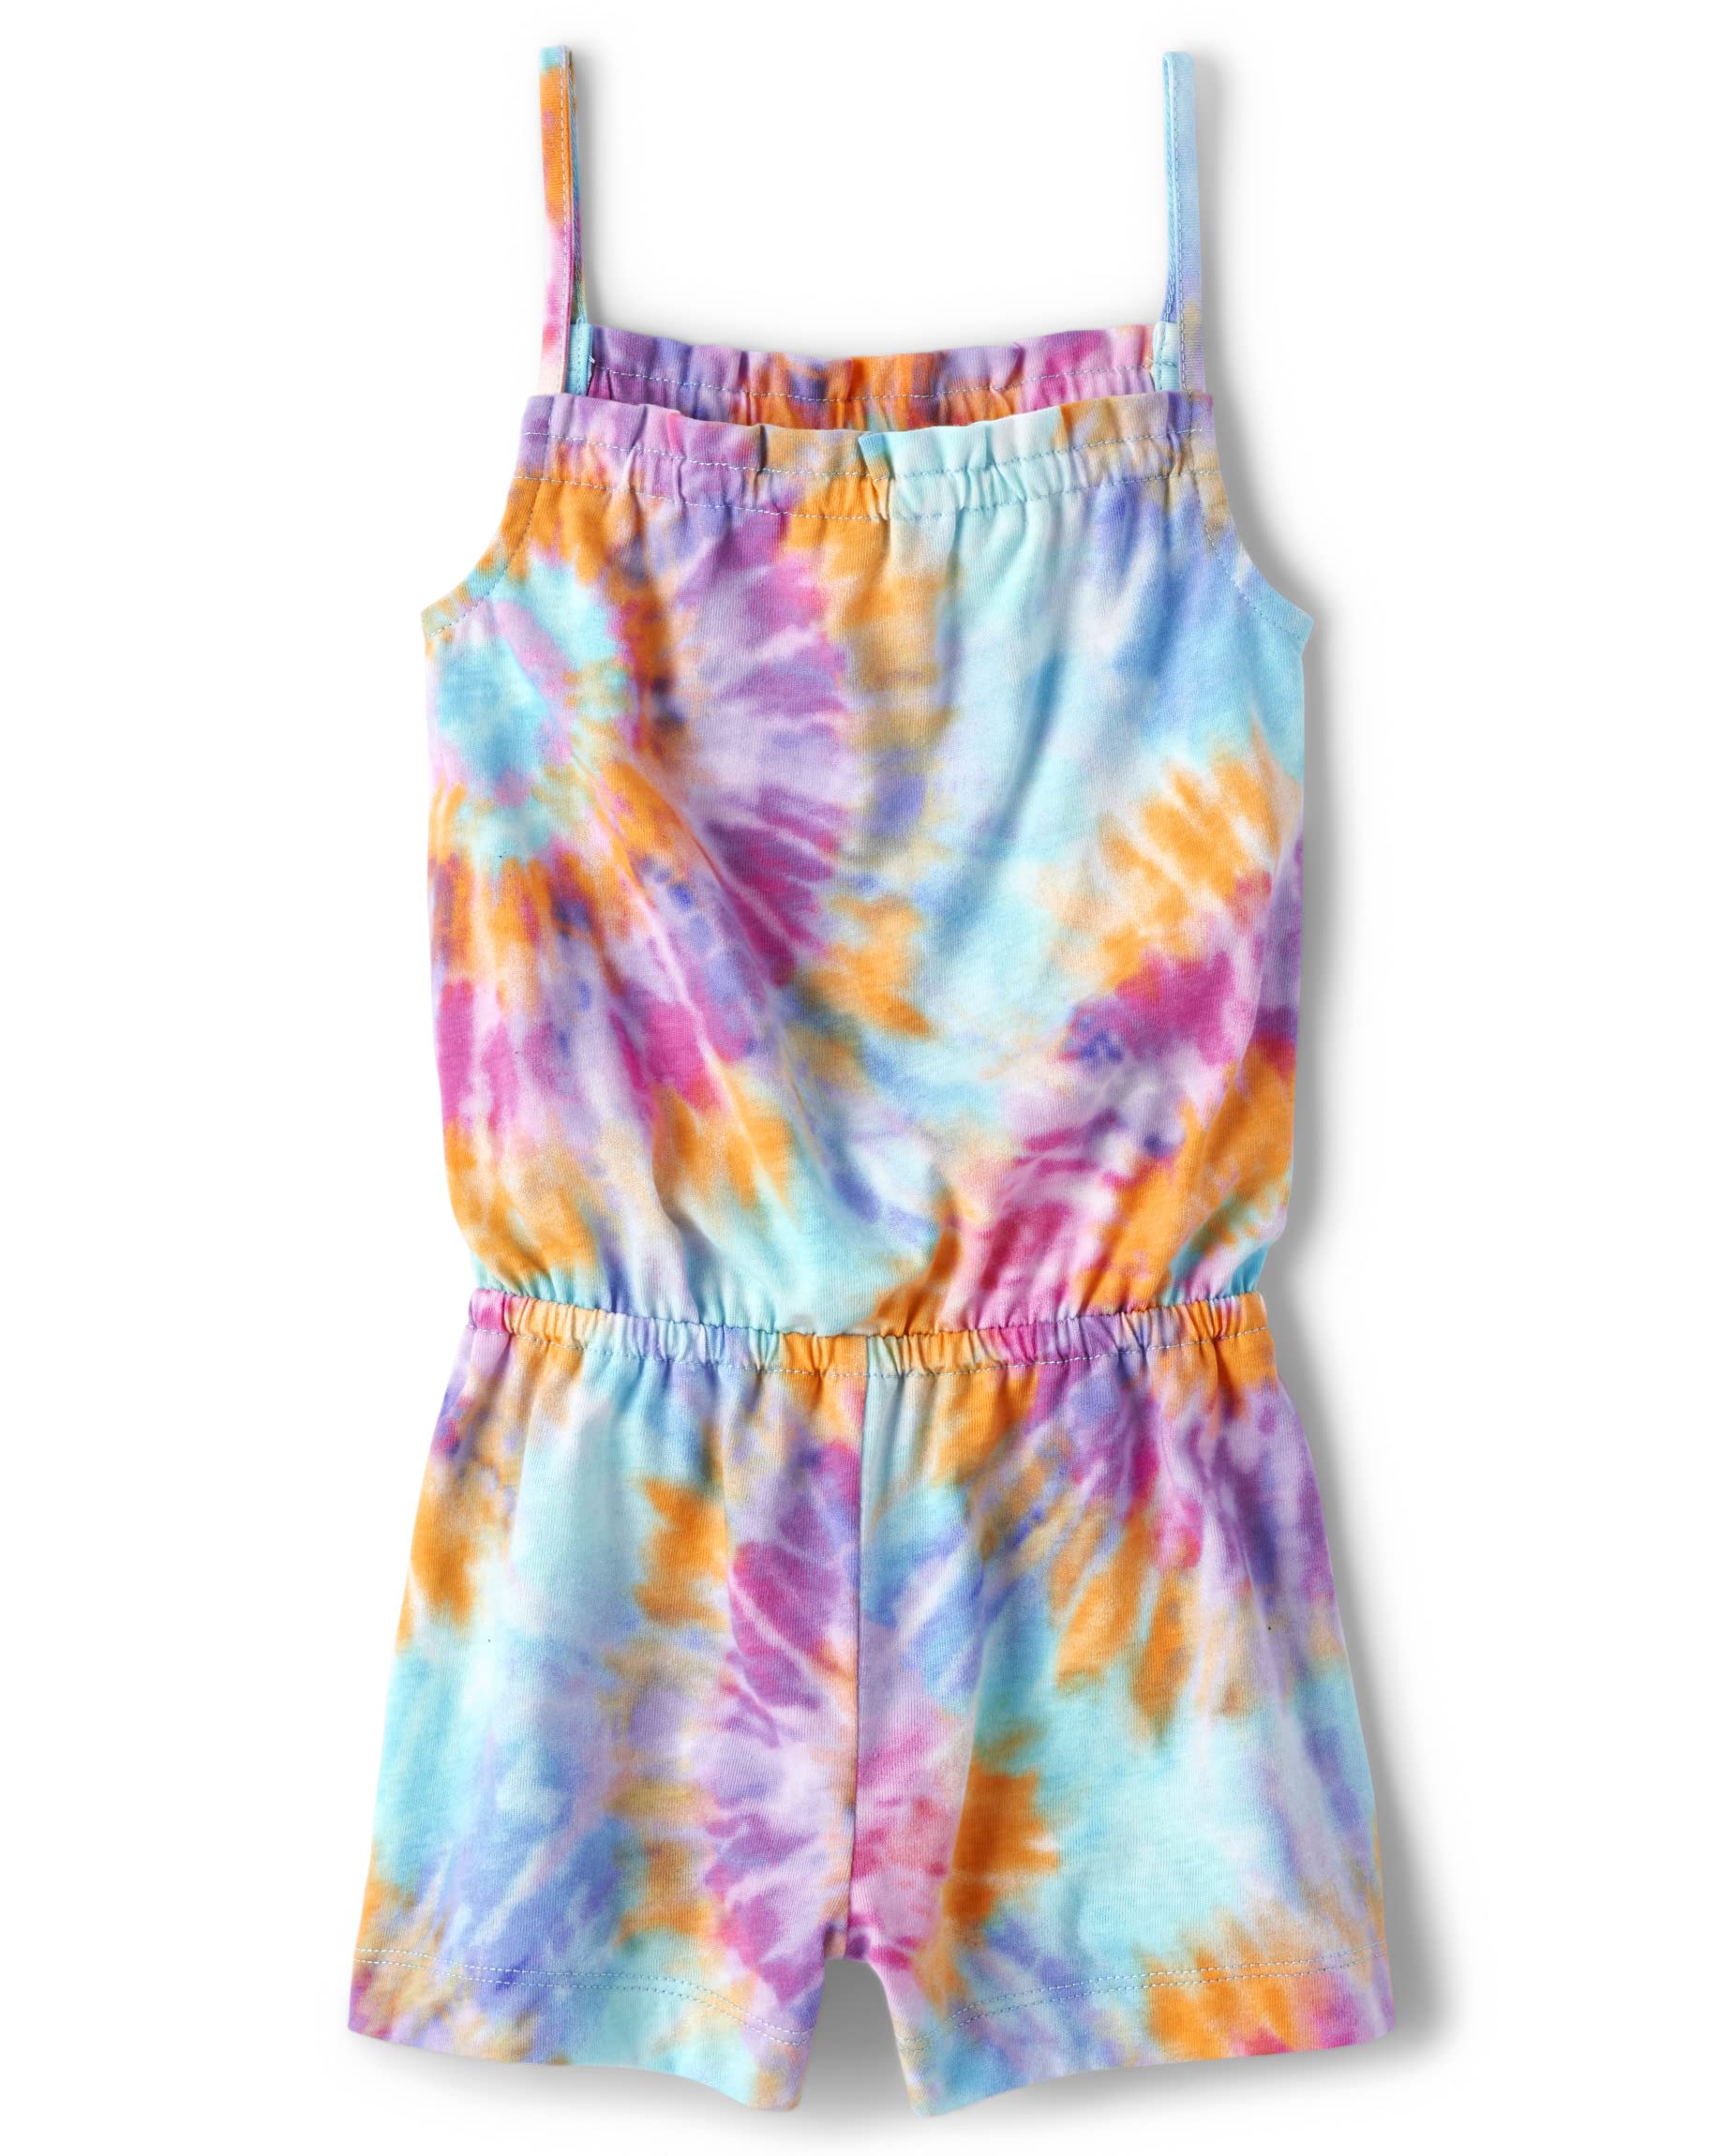 The Children's Place Baby & Toddler Girls Strappy Shorts Romper (Tie Dye) $5.99 + Free Shipping w/ Prime or on $25+